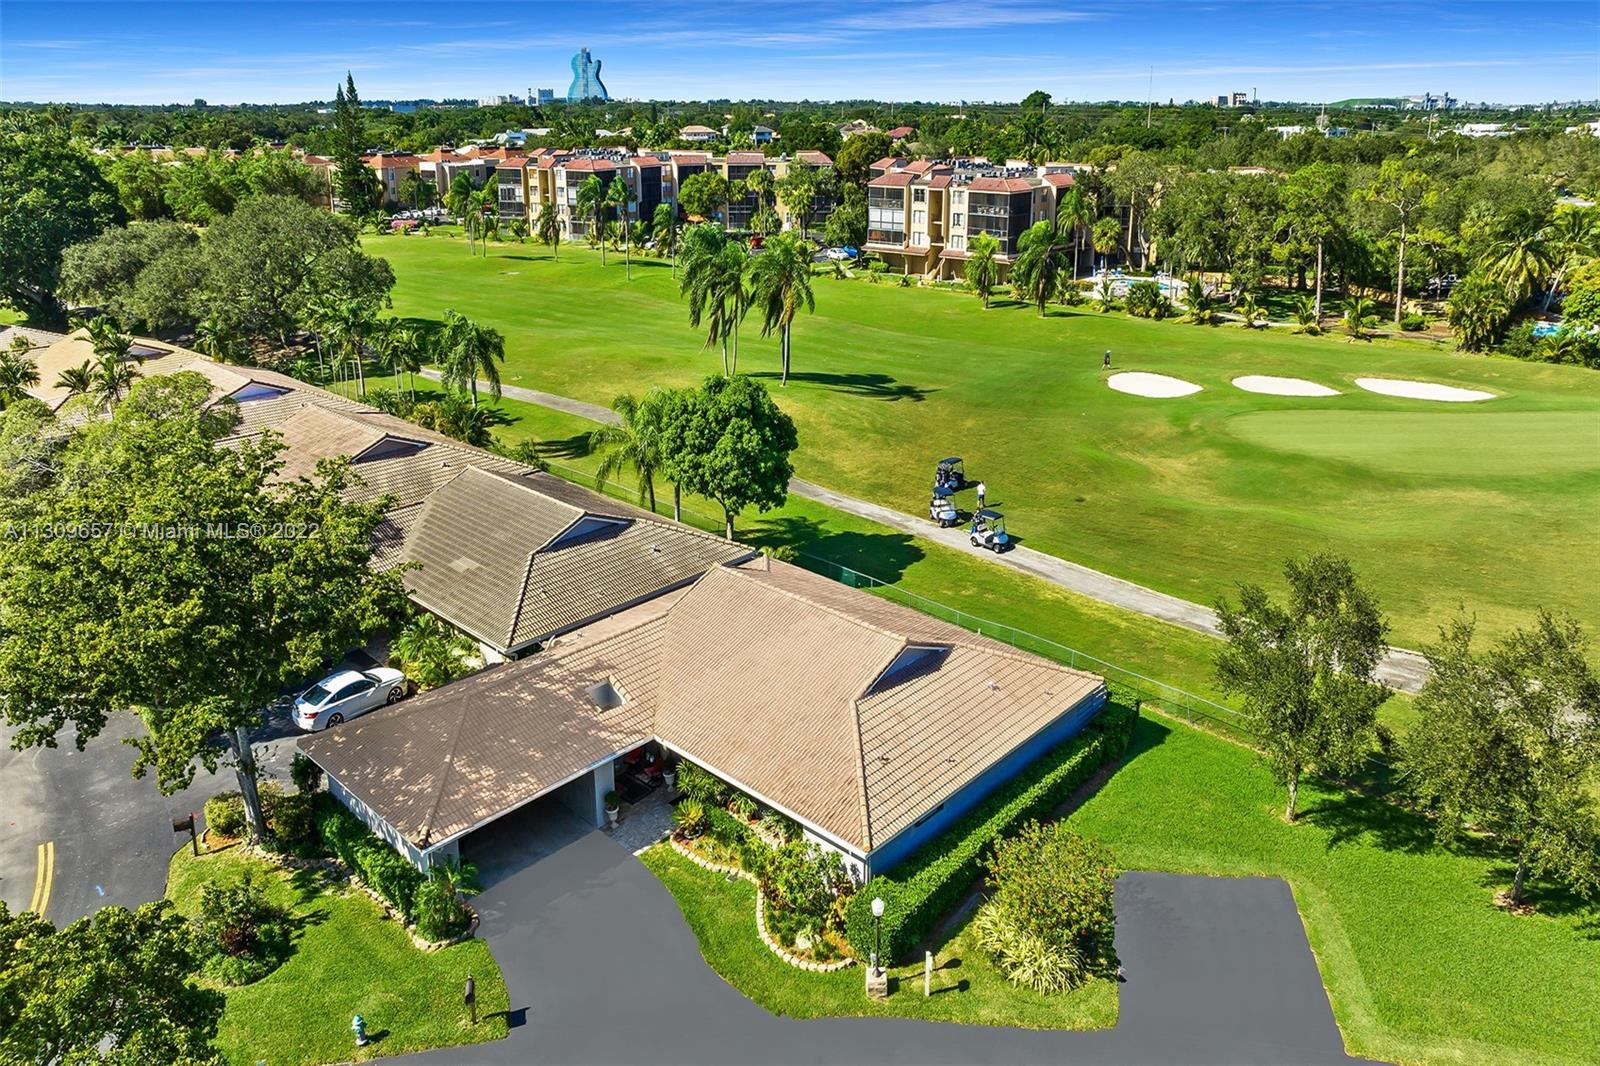 Hidden gem on the Emerald Hills golf course. This 2-bedroom unit in the Villa Residences has been co